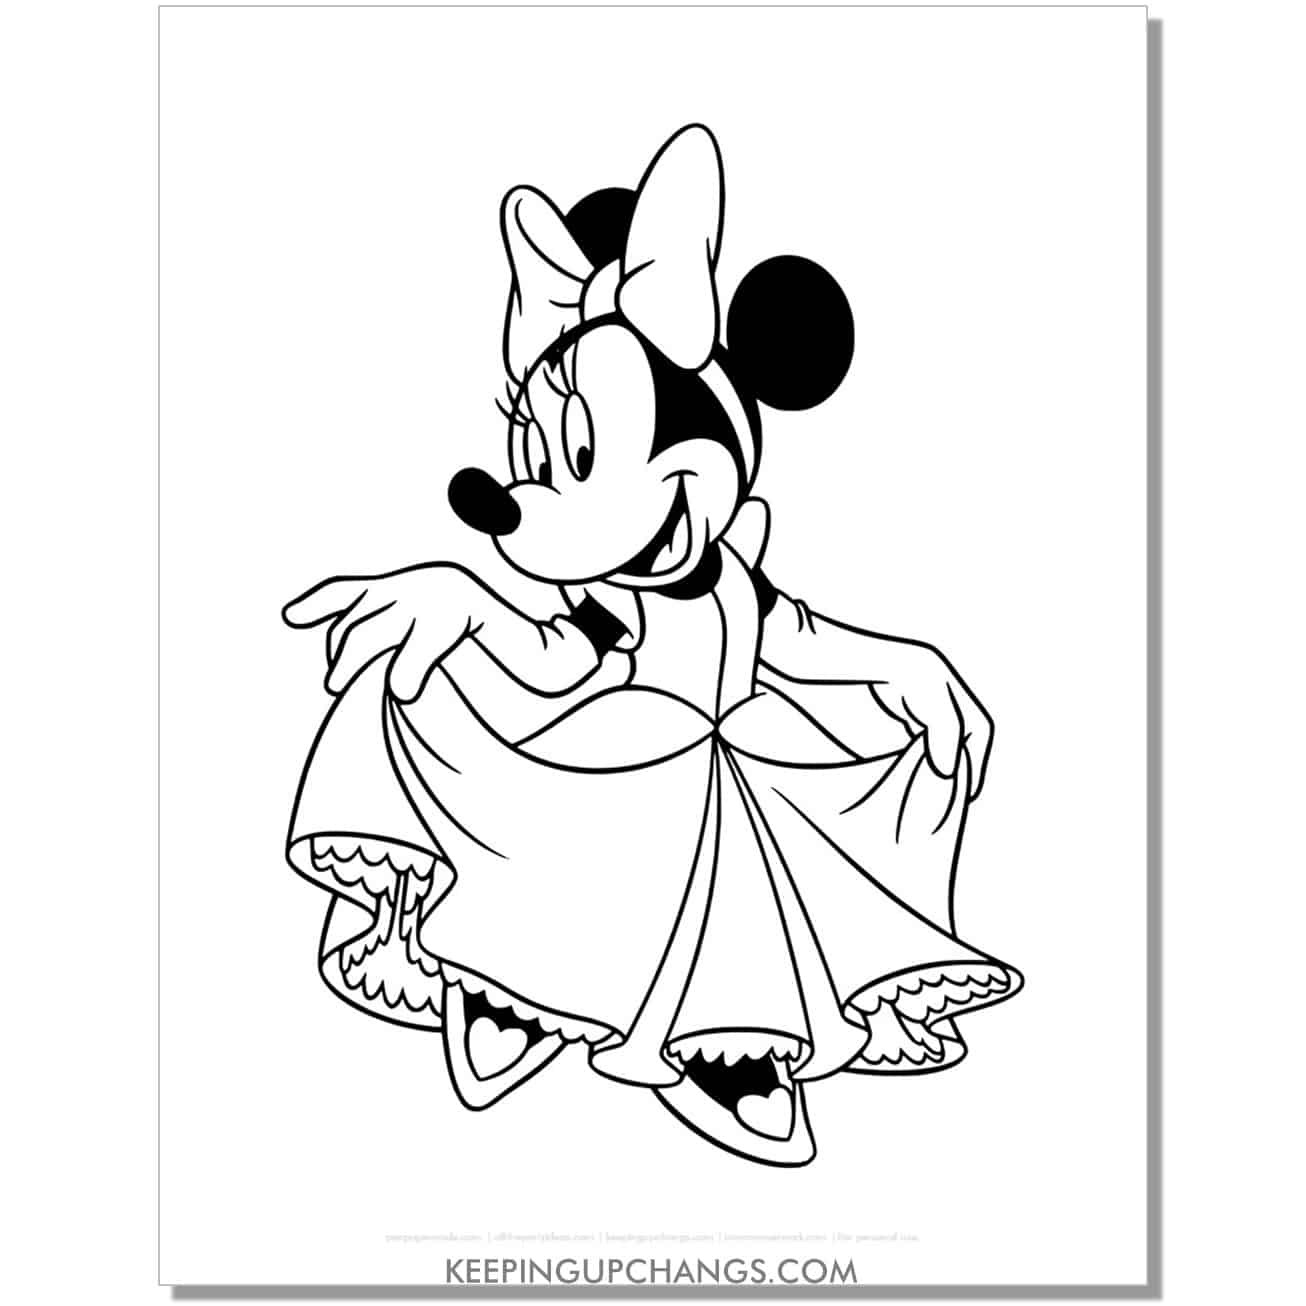 free minnie mouse in ballerina costume coloring page, sheet.